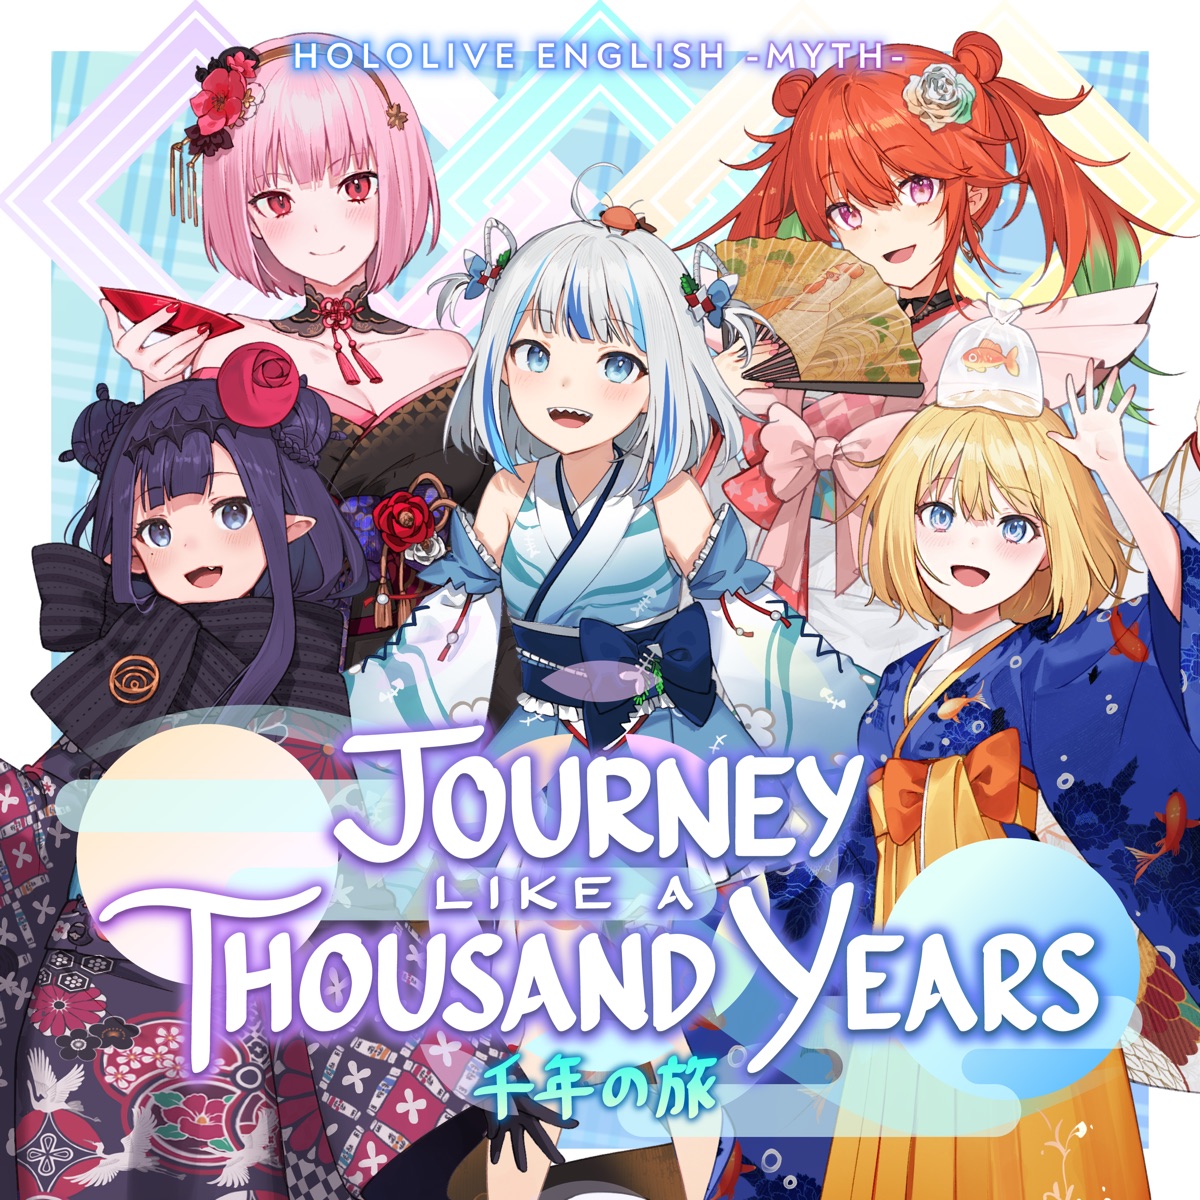 Cover image of『hololive English -Myth-Journey Like a Thousand Years』from the Album『Journey Like a Thousand Years』